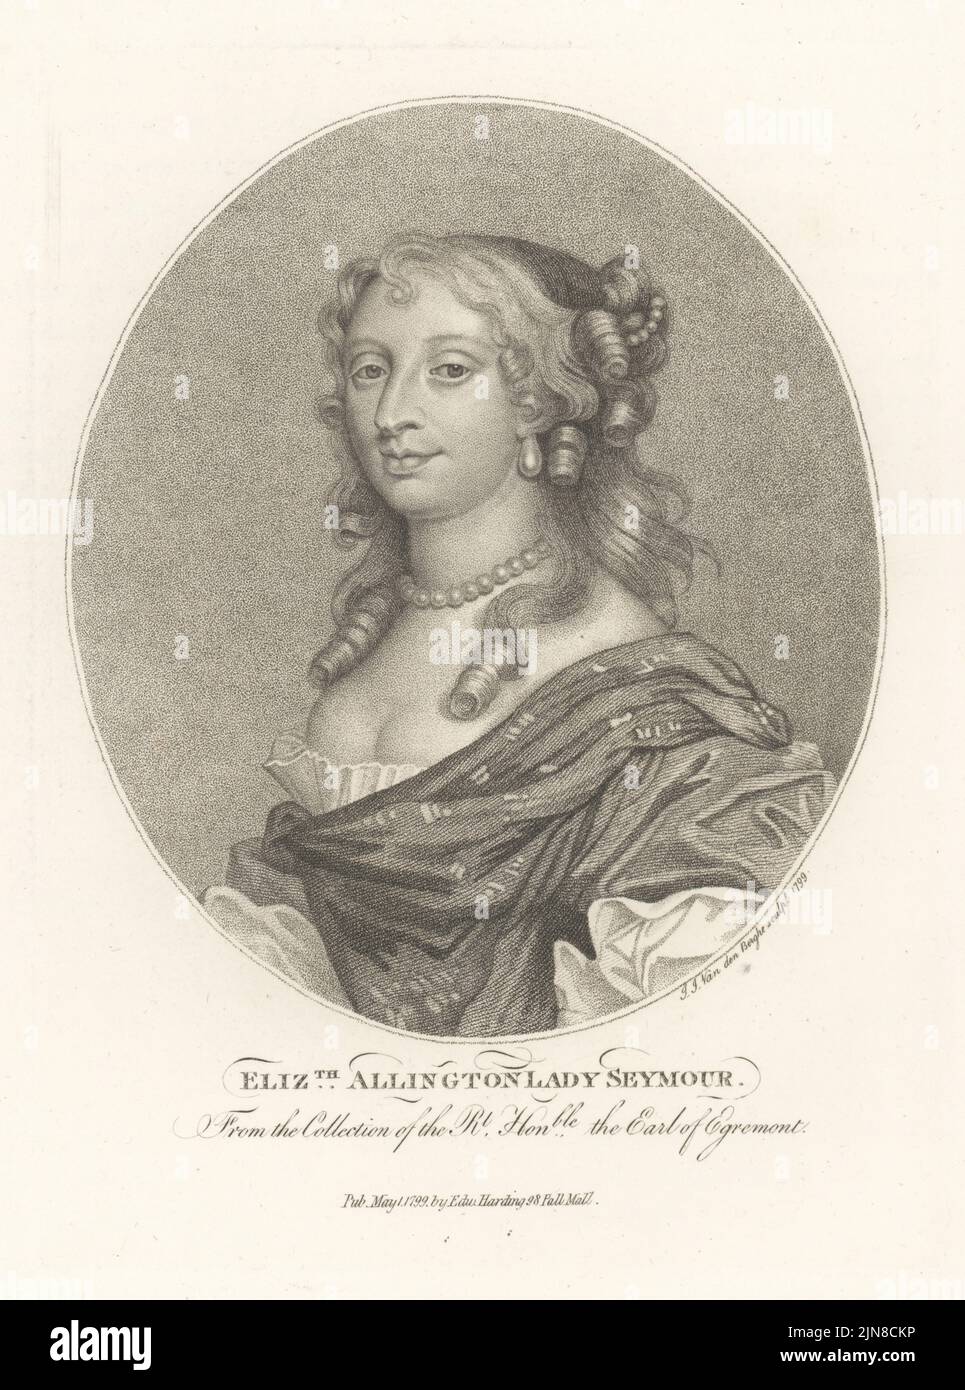 Elizabeth Allington, Lady Seymour, c.1632-1691. Married Charles Seymour, 2nd Baron Seymour of Trowbridge, in 1654. Hair in ringlets with pearls, pearl choker, low-cut gown. One of the Petworth Beauties in Petworth House, West Sussex. Copperplate engraving by  Ignatius Joseph van den Berghe after Sir Peter Lely from John Adolphus’ The British Cabinet, containing Portraits of Illustrious Personages, printed by T. Bensley for E. Harding, 98 Pall Mall, London, 1800. Stock Photo